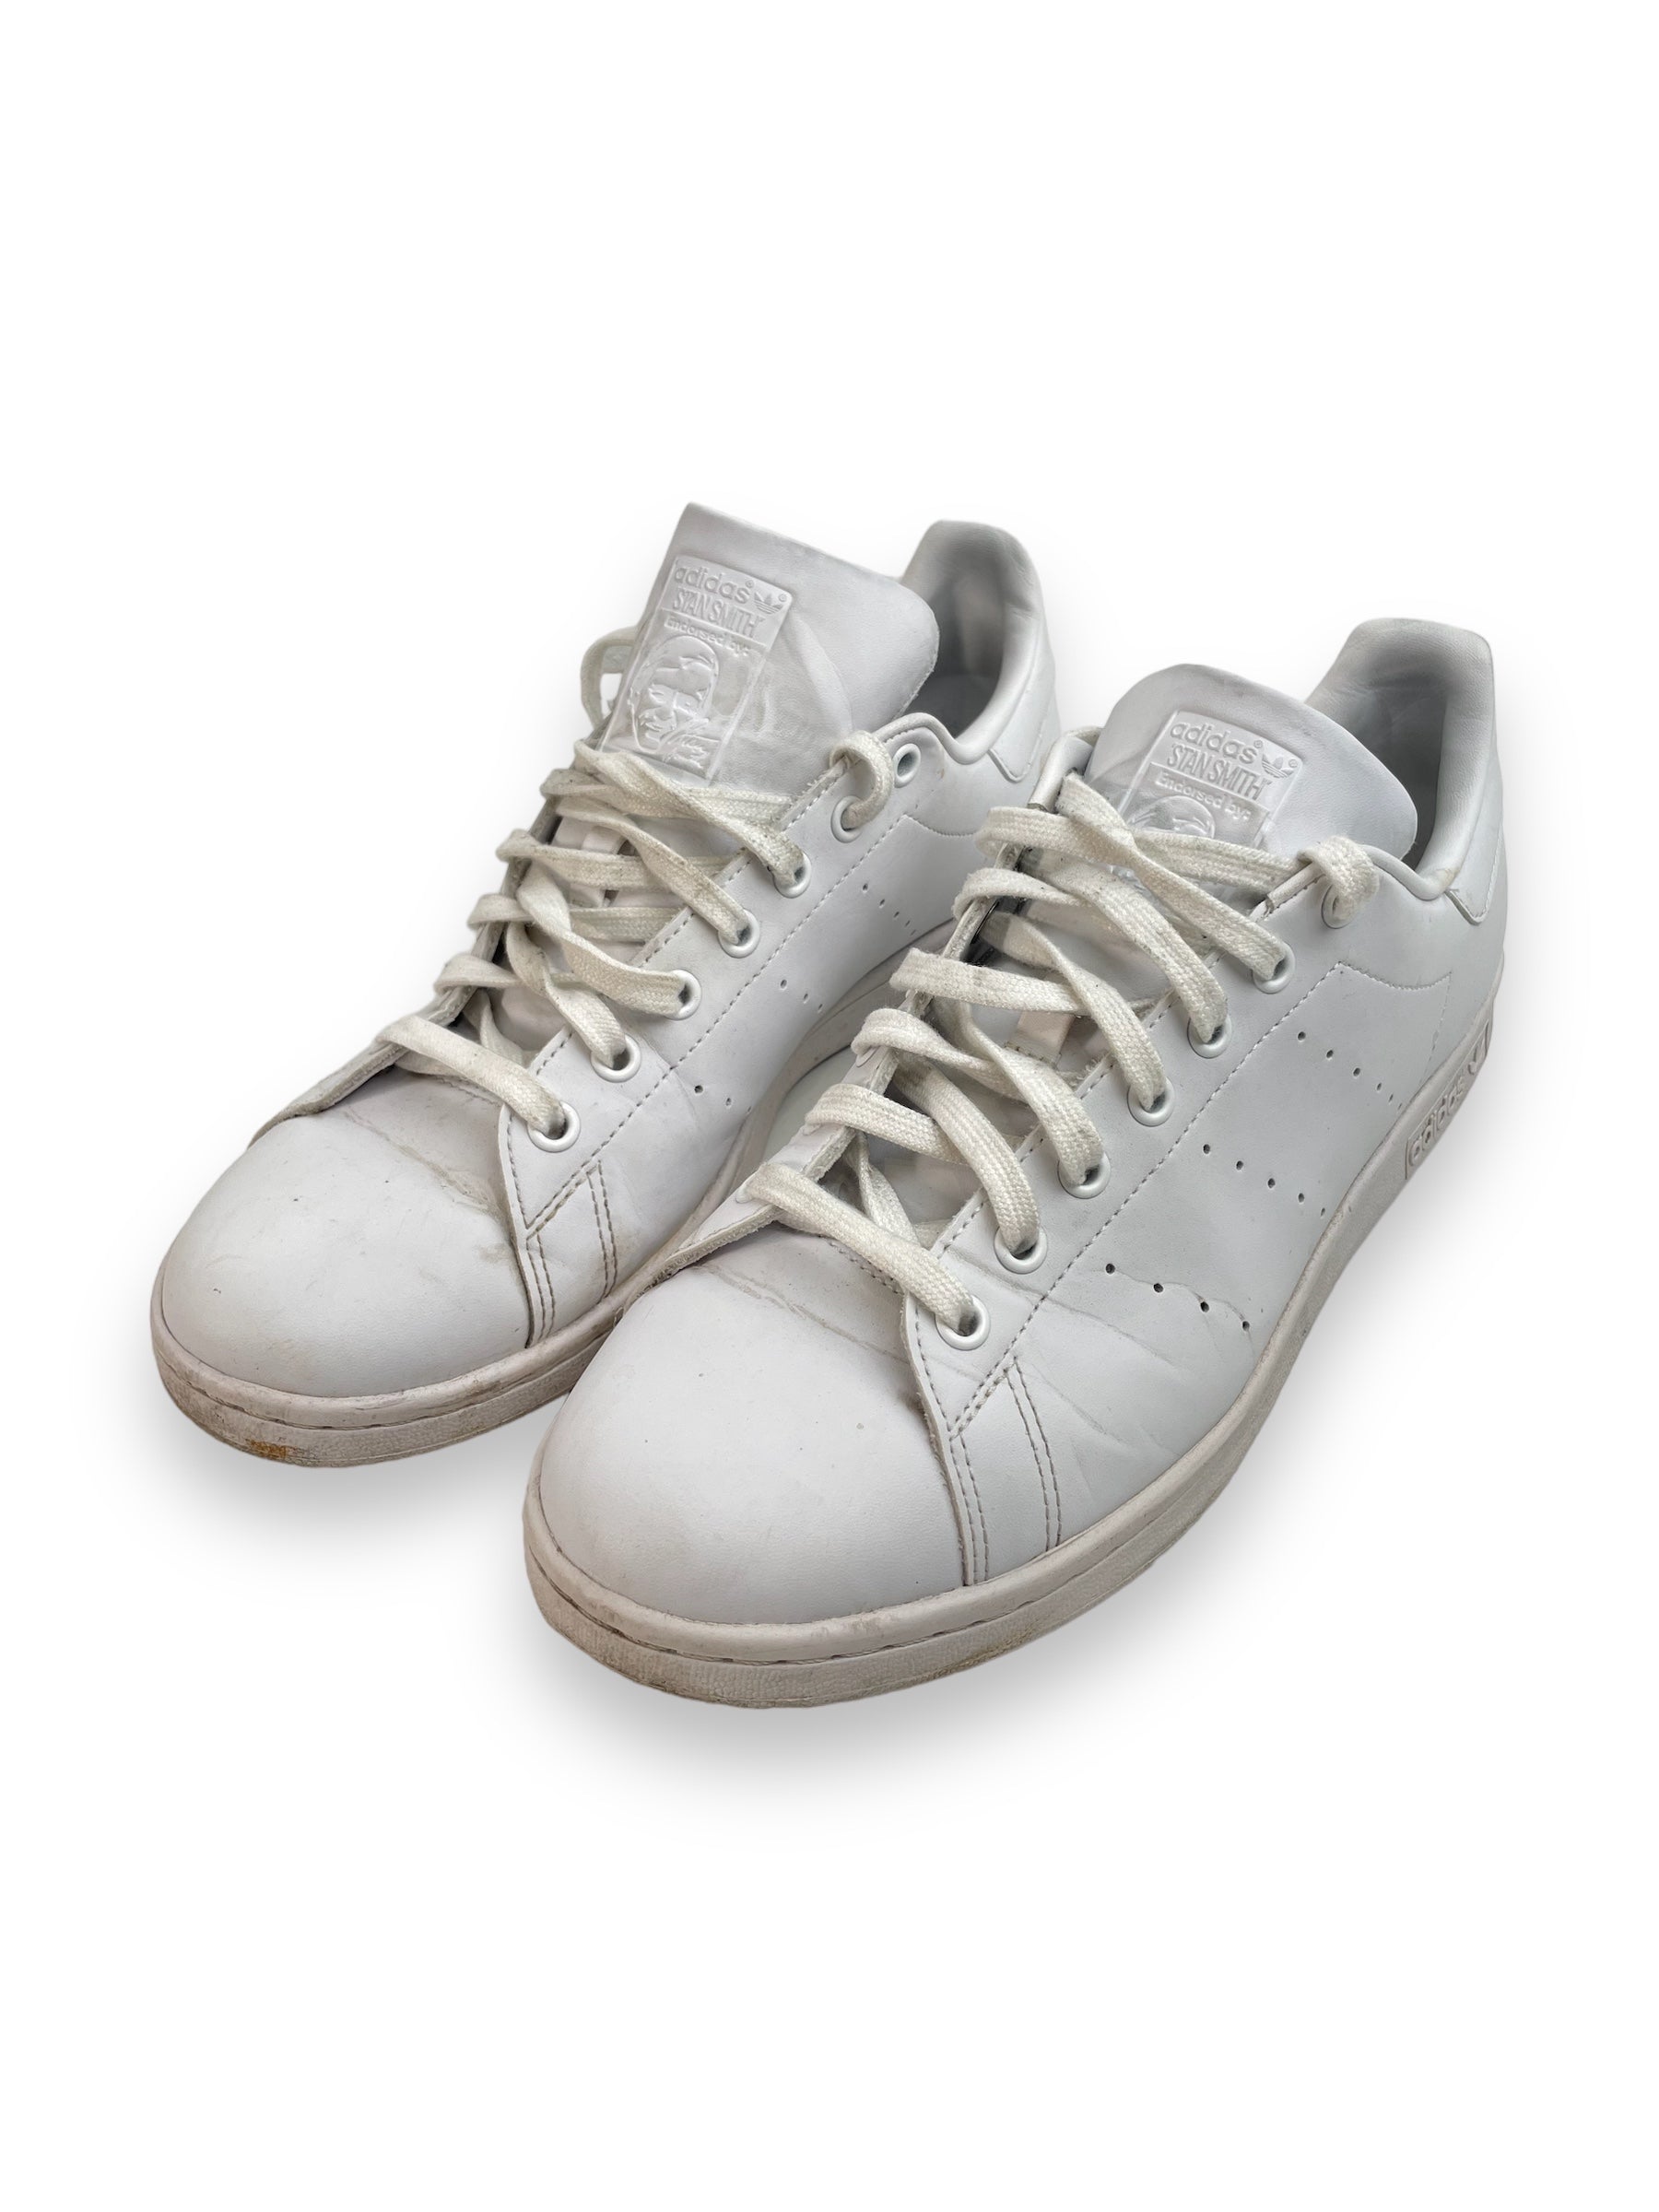 Chaussures blanches Adidas Stan Smith - Hommes taille 10